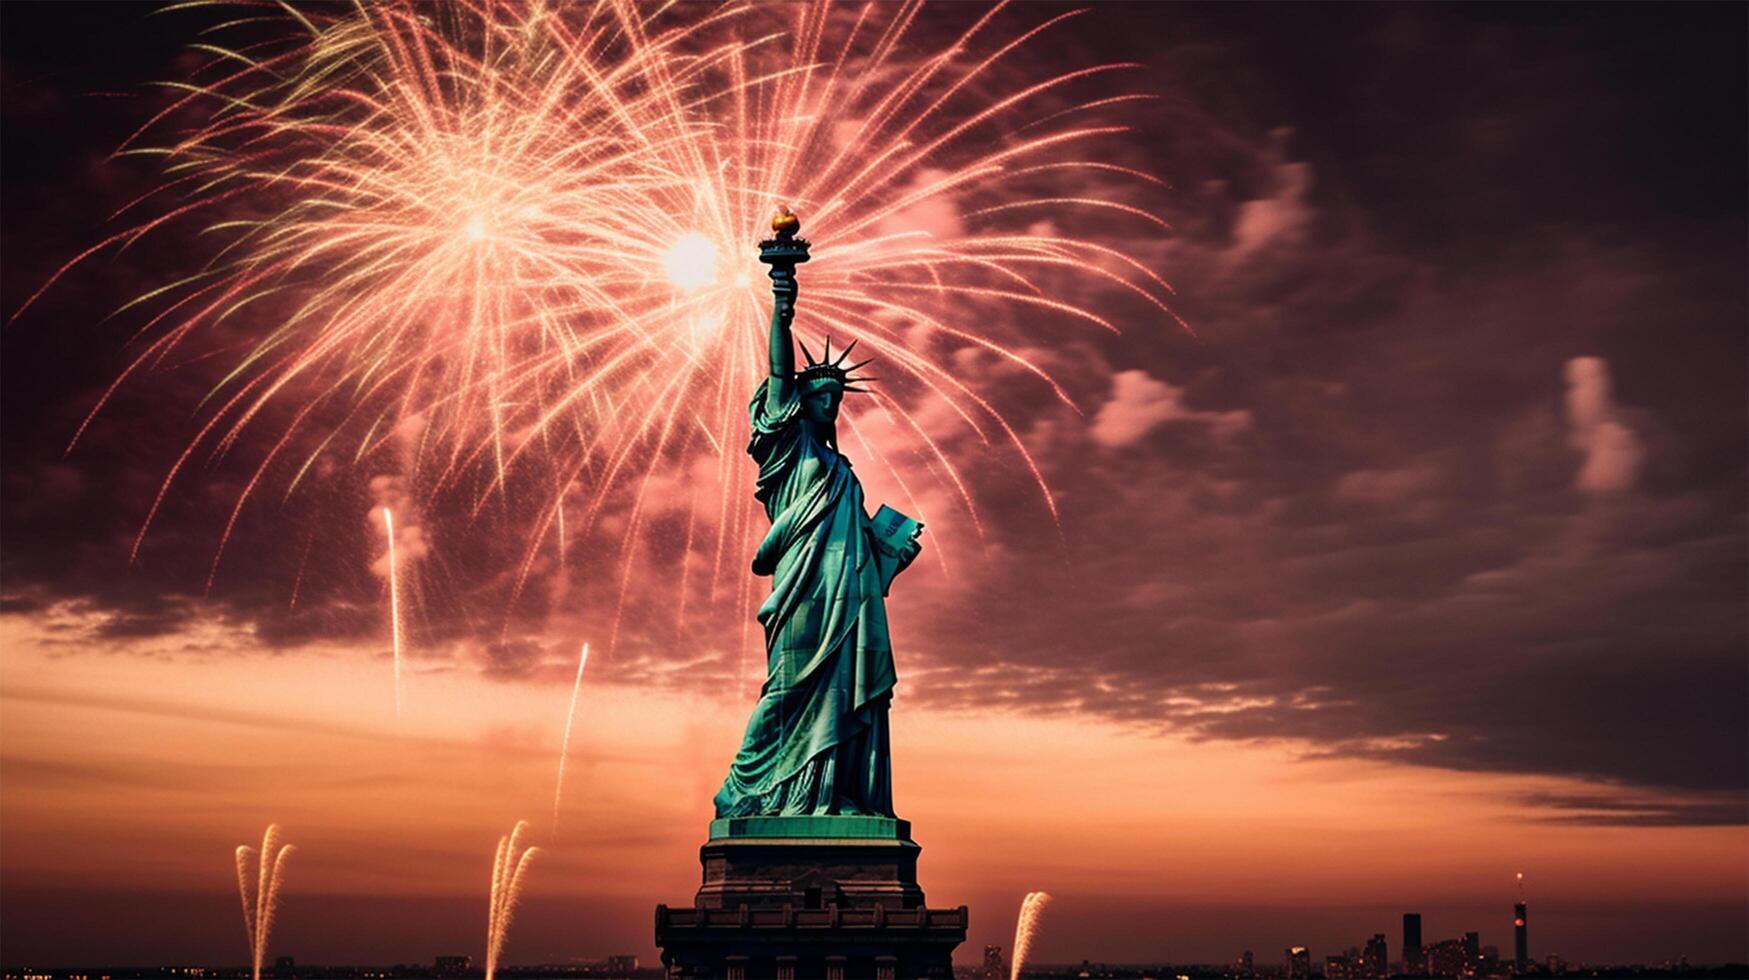 background view of statue of liberty and fireworks decoration, concept of celebrating american independence day, photo